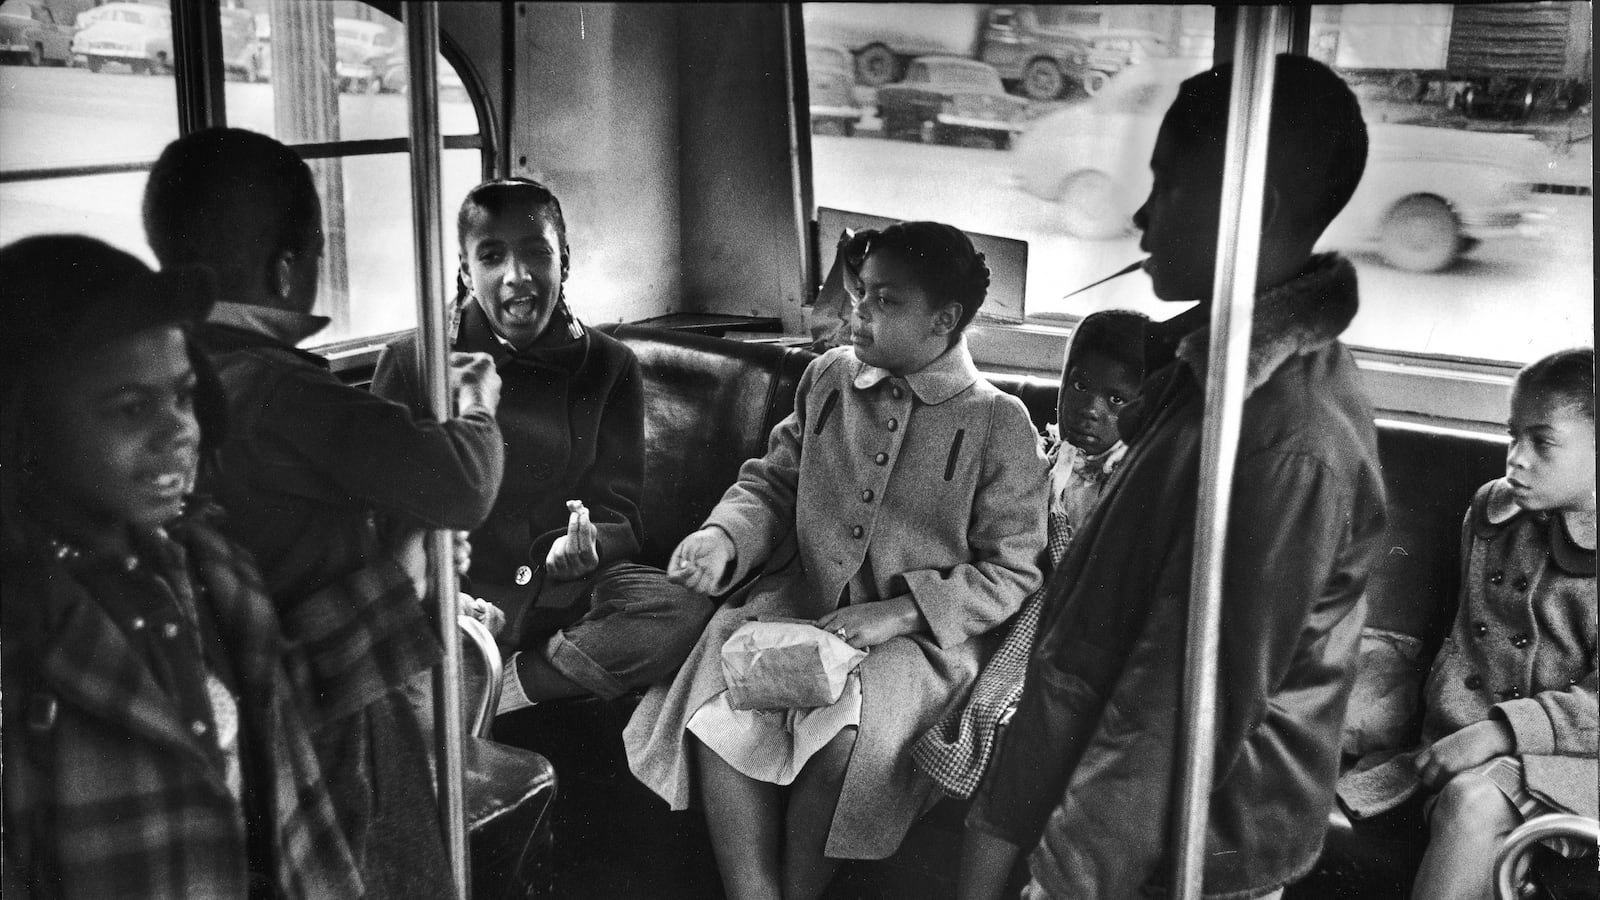 Linda Brown (center) and her sister Terry Lynn (far right) sit on a bus as they ride to the racially segregated Monroe Elementary School, Topeka, Kansas, March 1953. (Photo by Carl Iwasaki/The LIFE Images Collection/Getty Images)